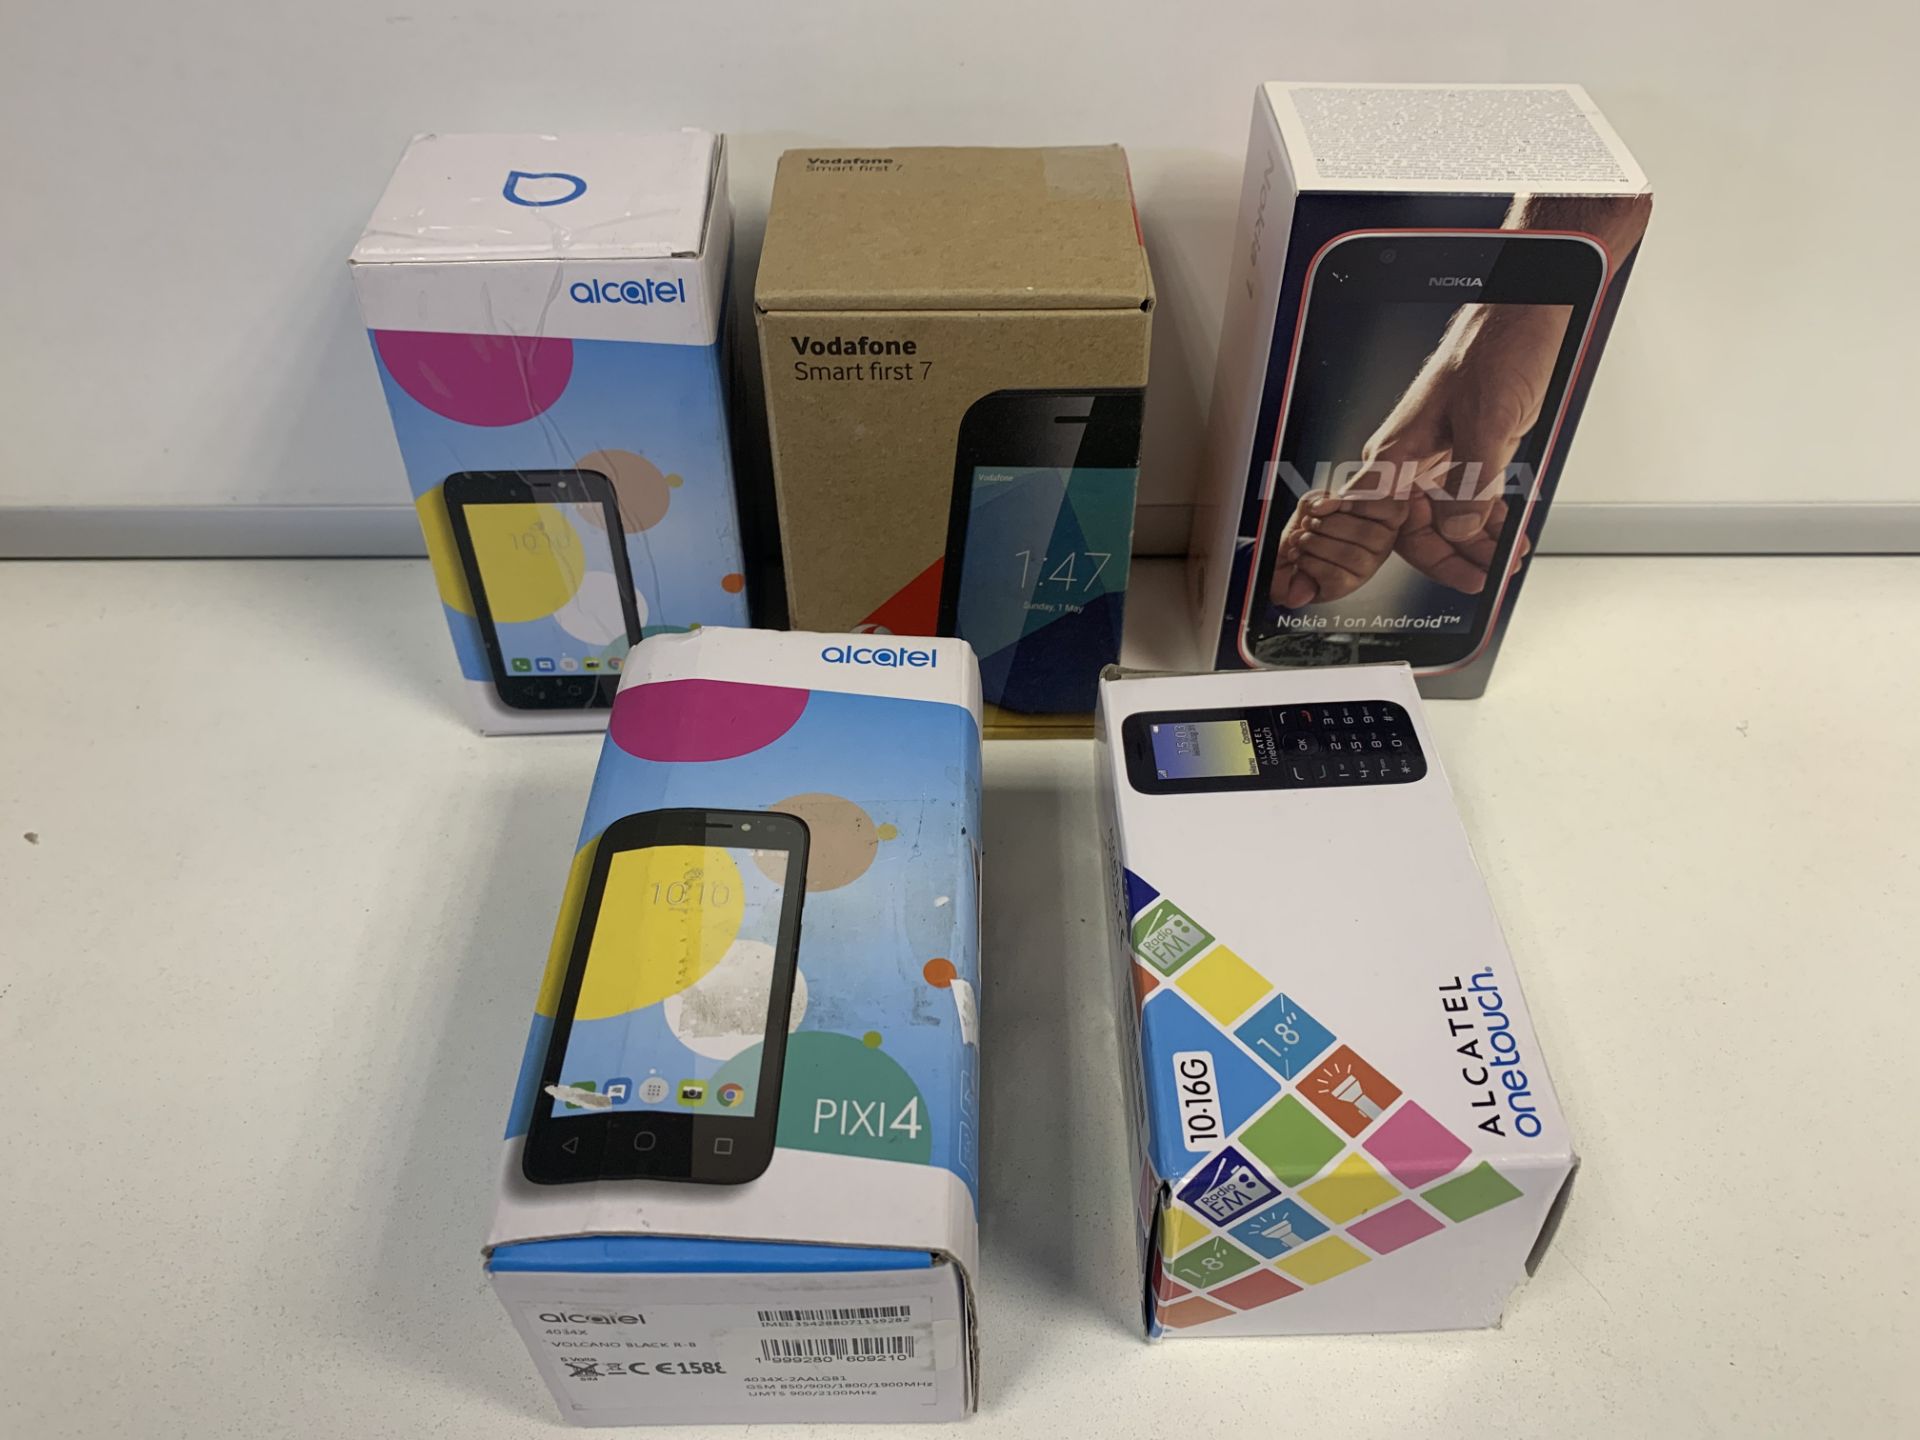 5 X RETAIL BOXED OPEN NETWORK MOBILE PHONES INCLUDING VODAFONE SMART FIRST 7, ALCATEL PIXI 4, ETC